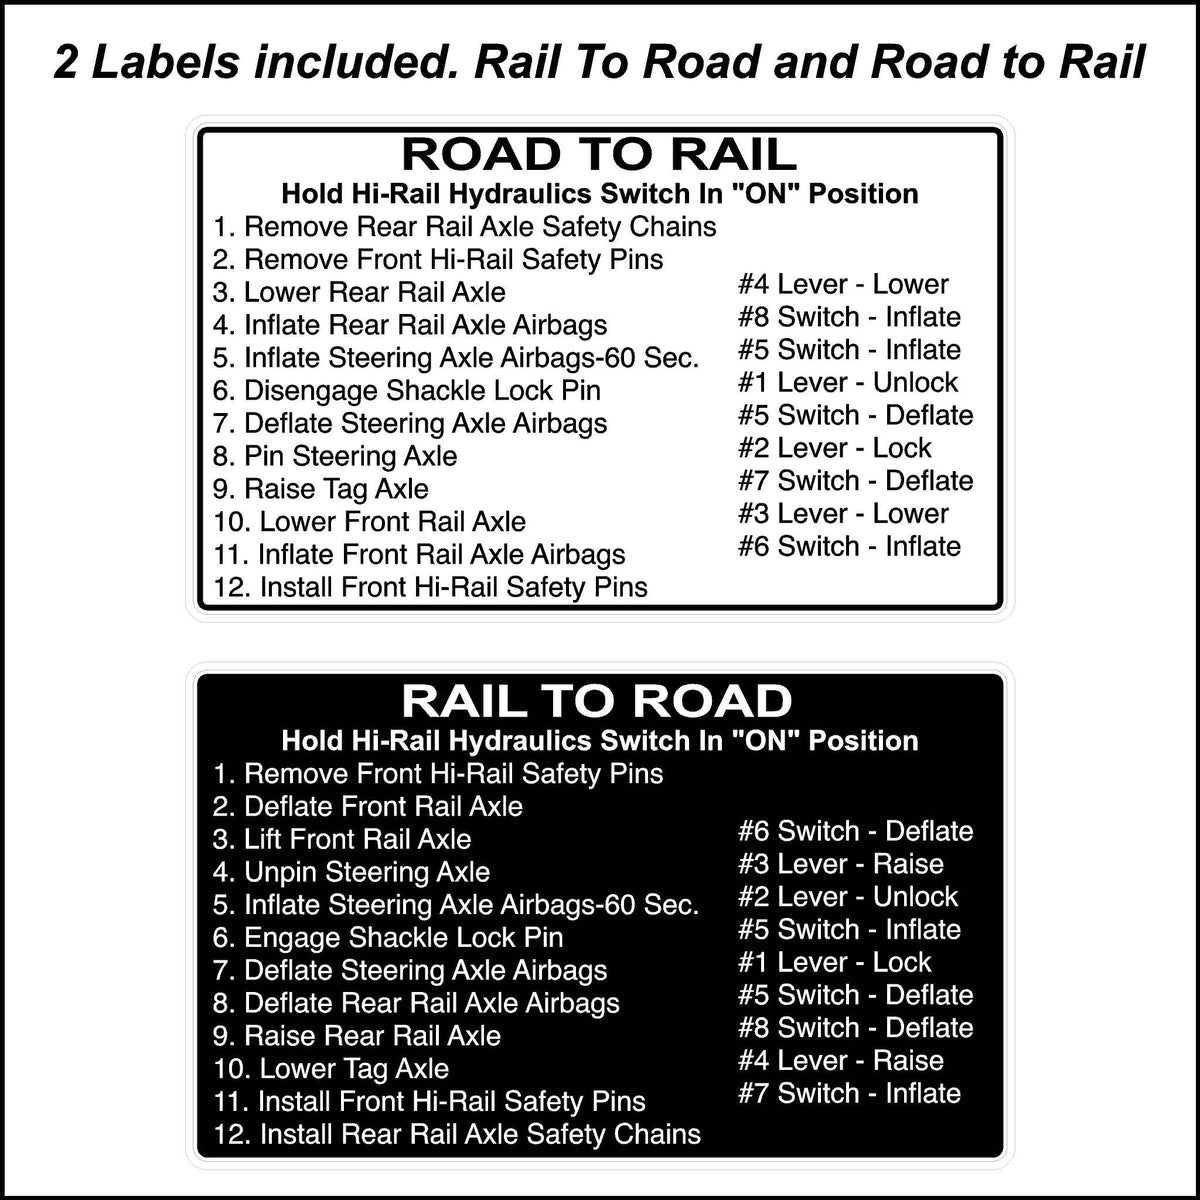 Road To Rail safety Sticker Printed with. Hold Hi-Rail Hydraulics Switch In &quot;ON&quot; Position 1. Remove Rear Rail Axle Safety Chains 2. Remove Front Hi-Rail Safety Pins 3. Lower Rear Rail Axle 4. Inflate Rear Rail Axle Airbags 5. Inflate Steering Axle Airbags-60 Sec. 6. Disengage Shackle Lock Pin 7. Deflate Steering Axle Airbags 8. Pin Steering Axle 9. Raise Tag Axle 10. Lower Front Rail Axle 11. Inflate Front Rail Axle Airbags 12. Install Front Hi-Rail Safety Pins.